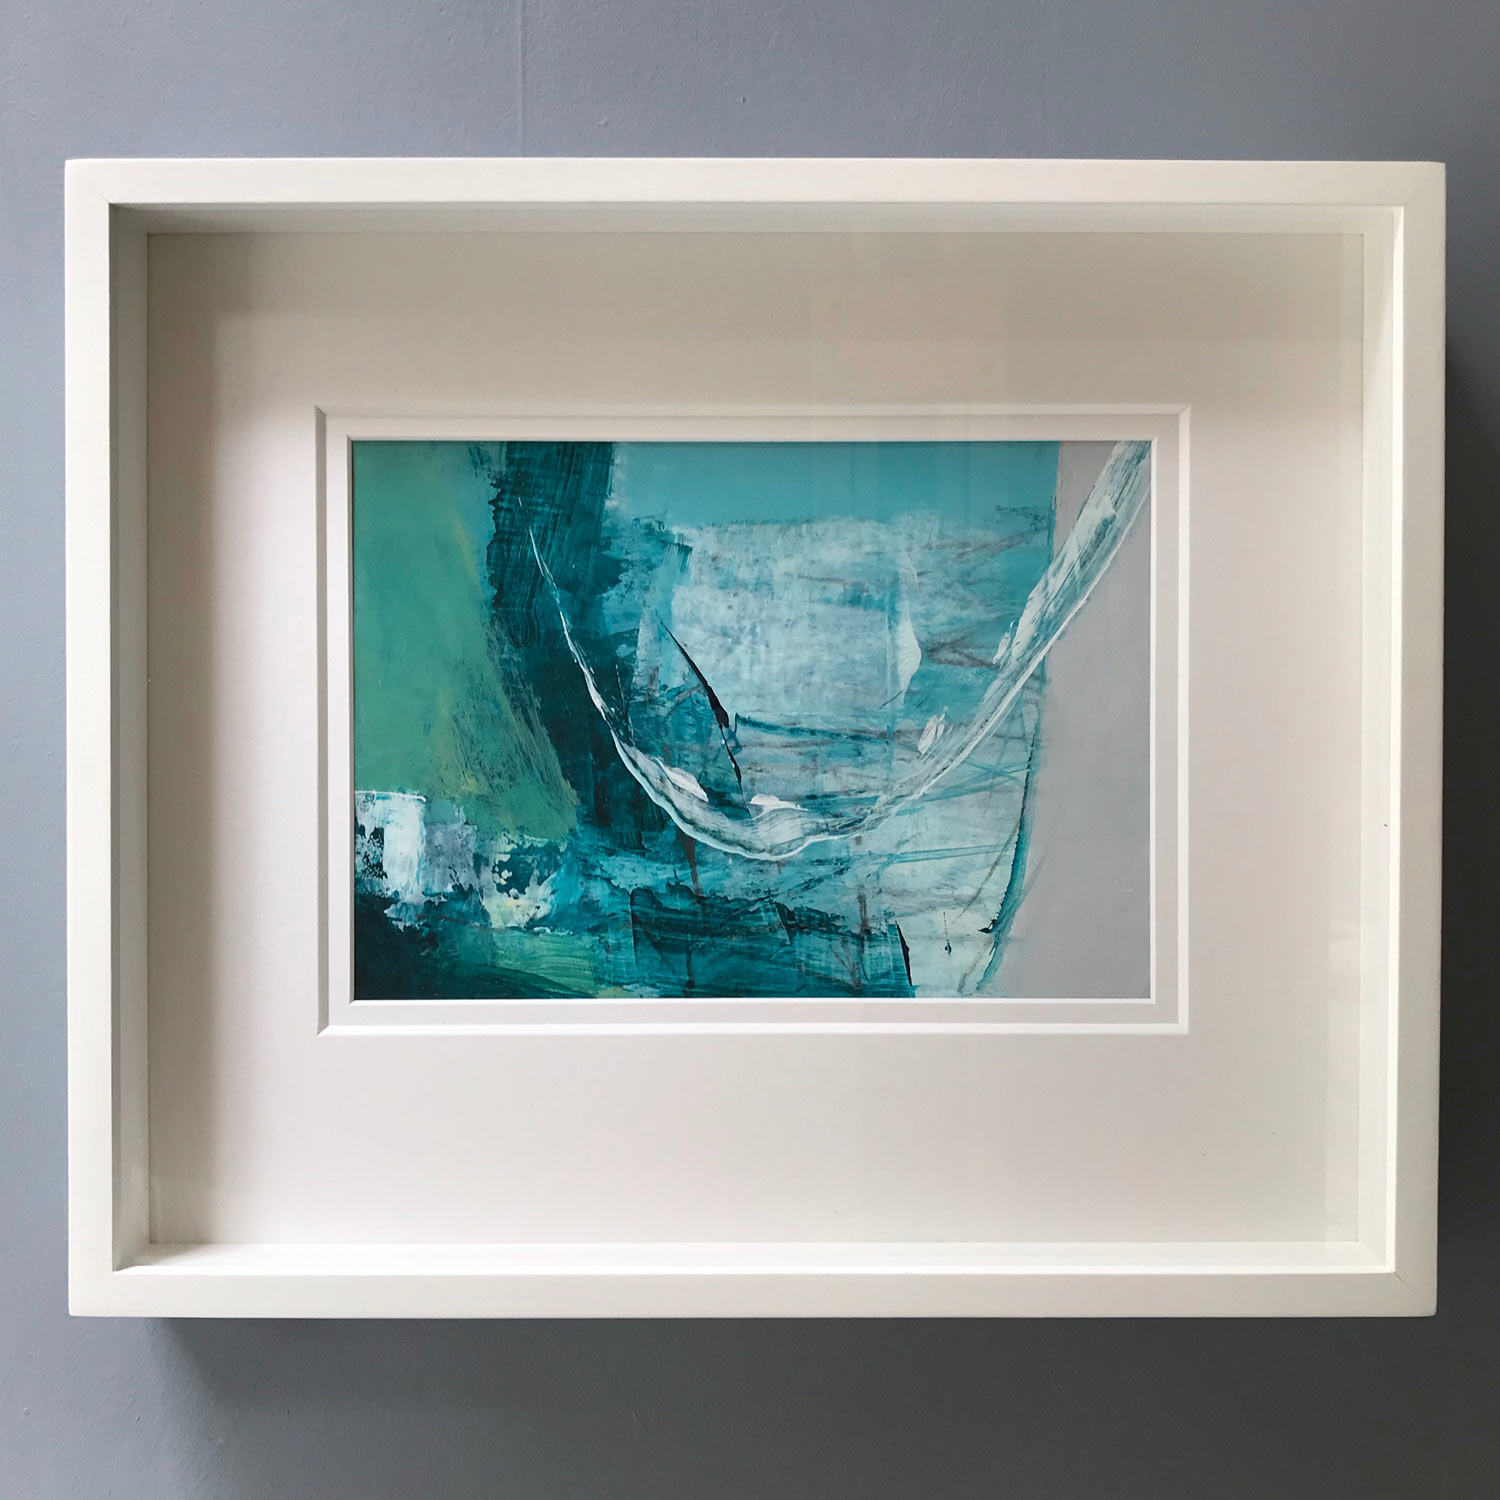 Strumble Head framed by Neil Canning for his studio collection winter 2021